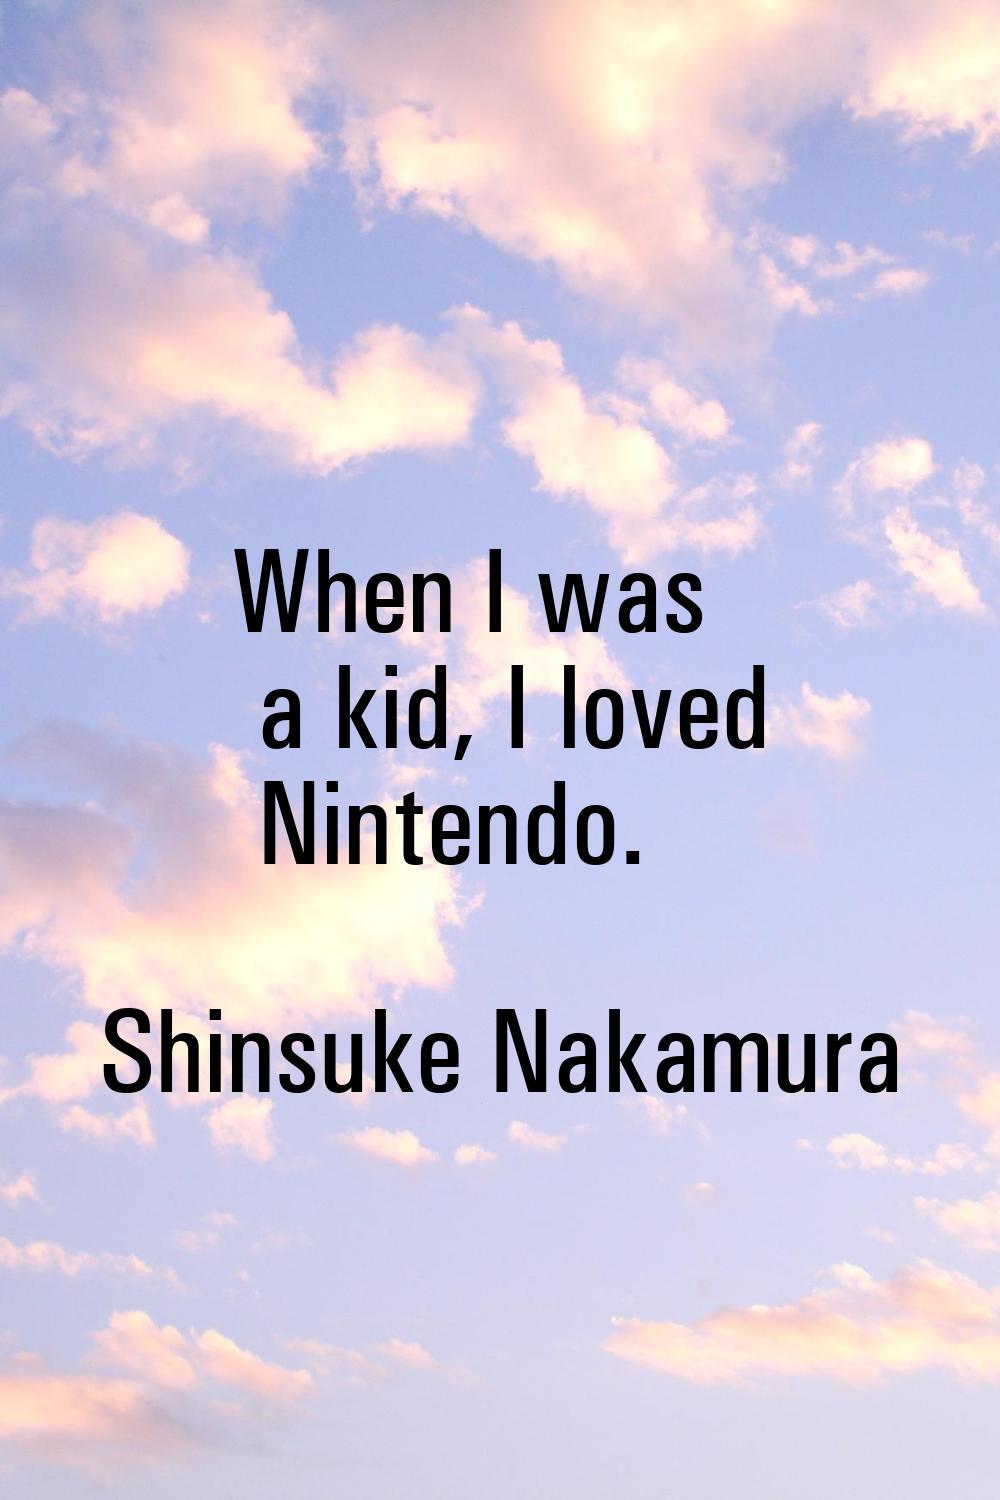 When I was a kid, I loved Nintendo.